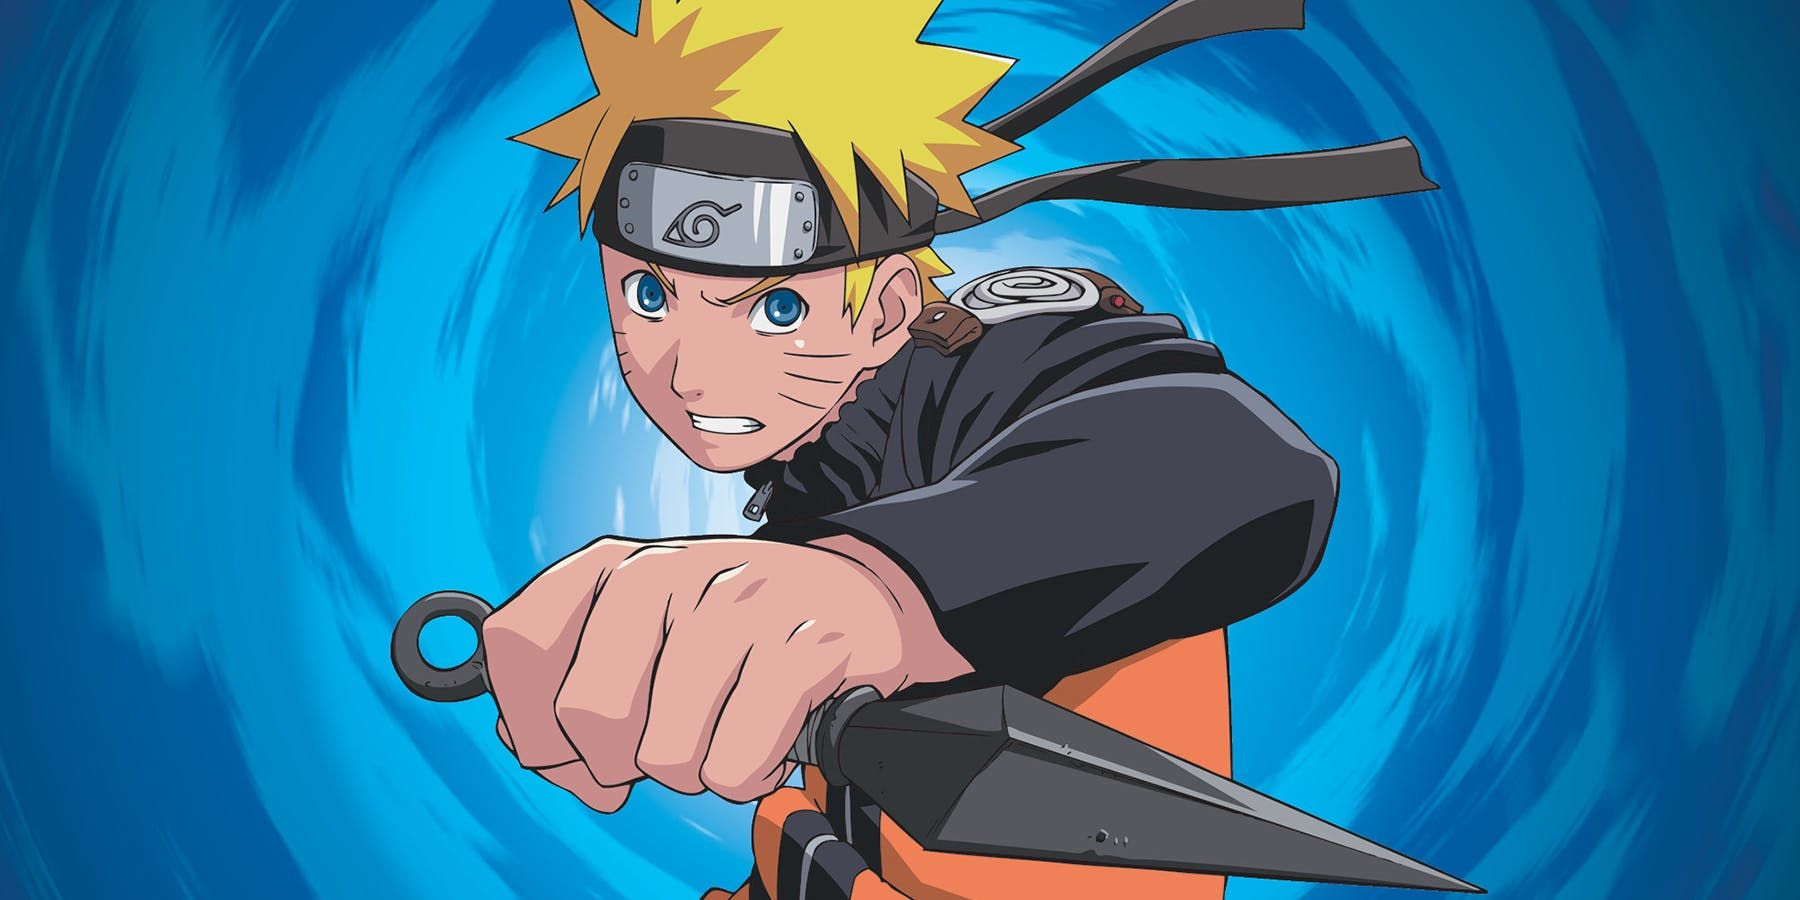 An image of Naruto holding a dagger and standing in front of a blue swirling background